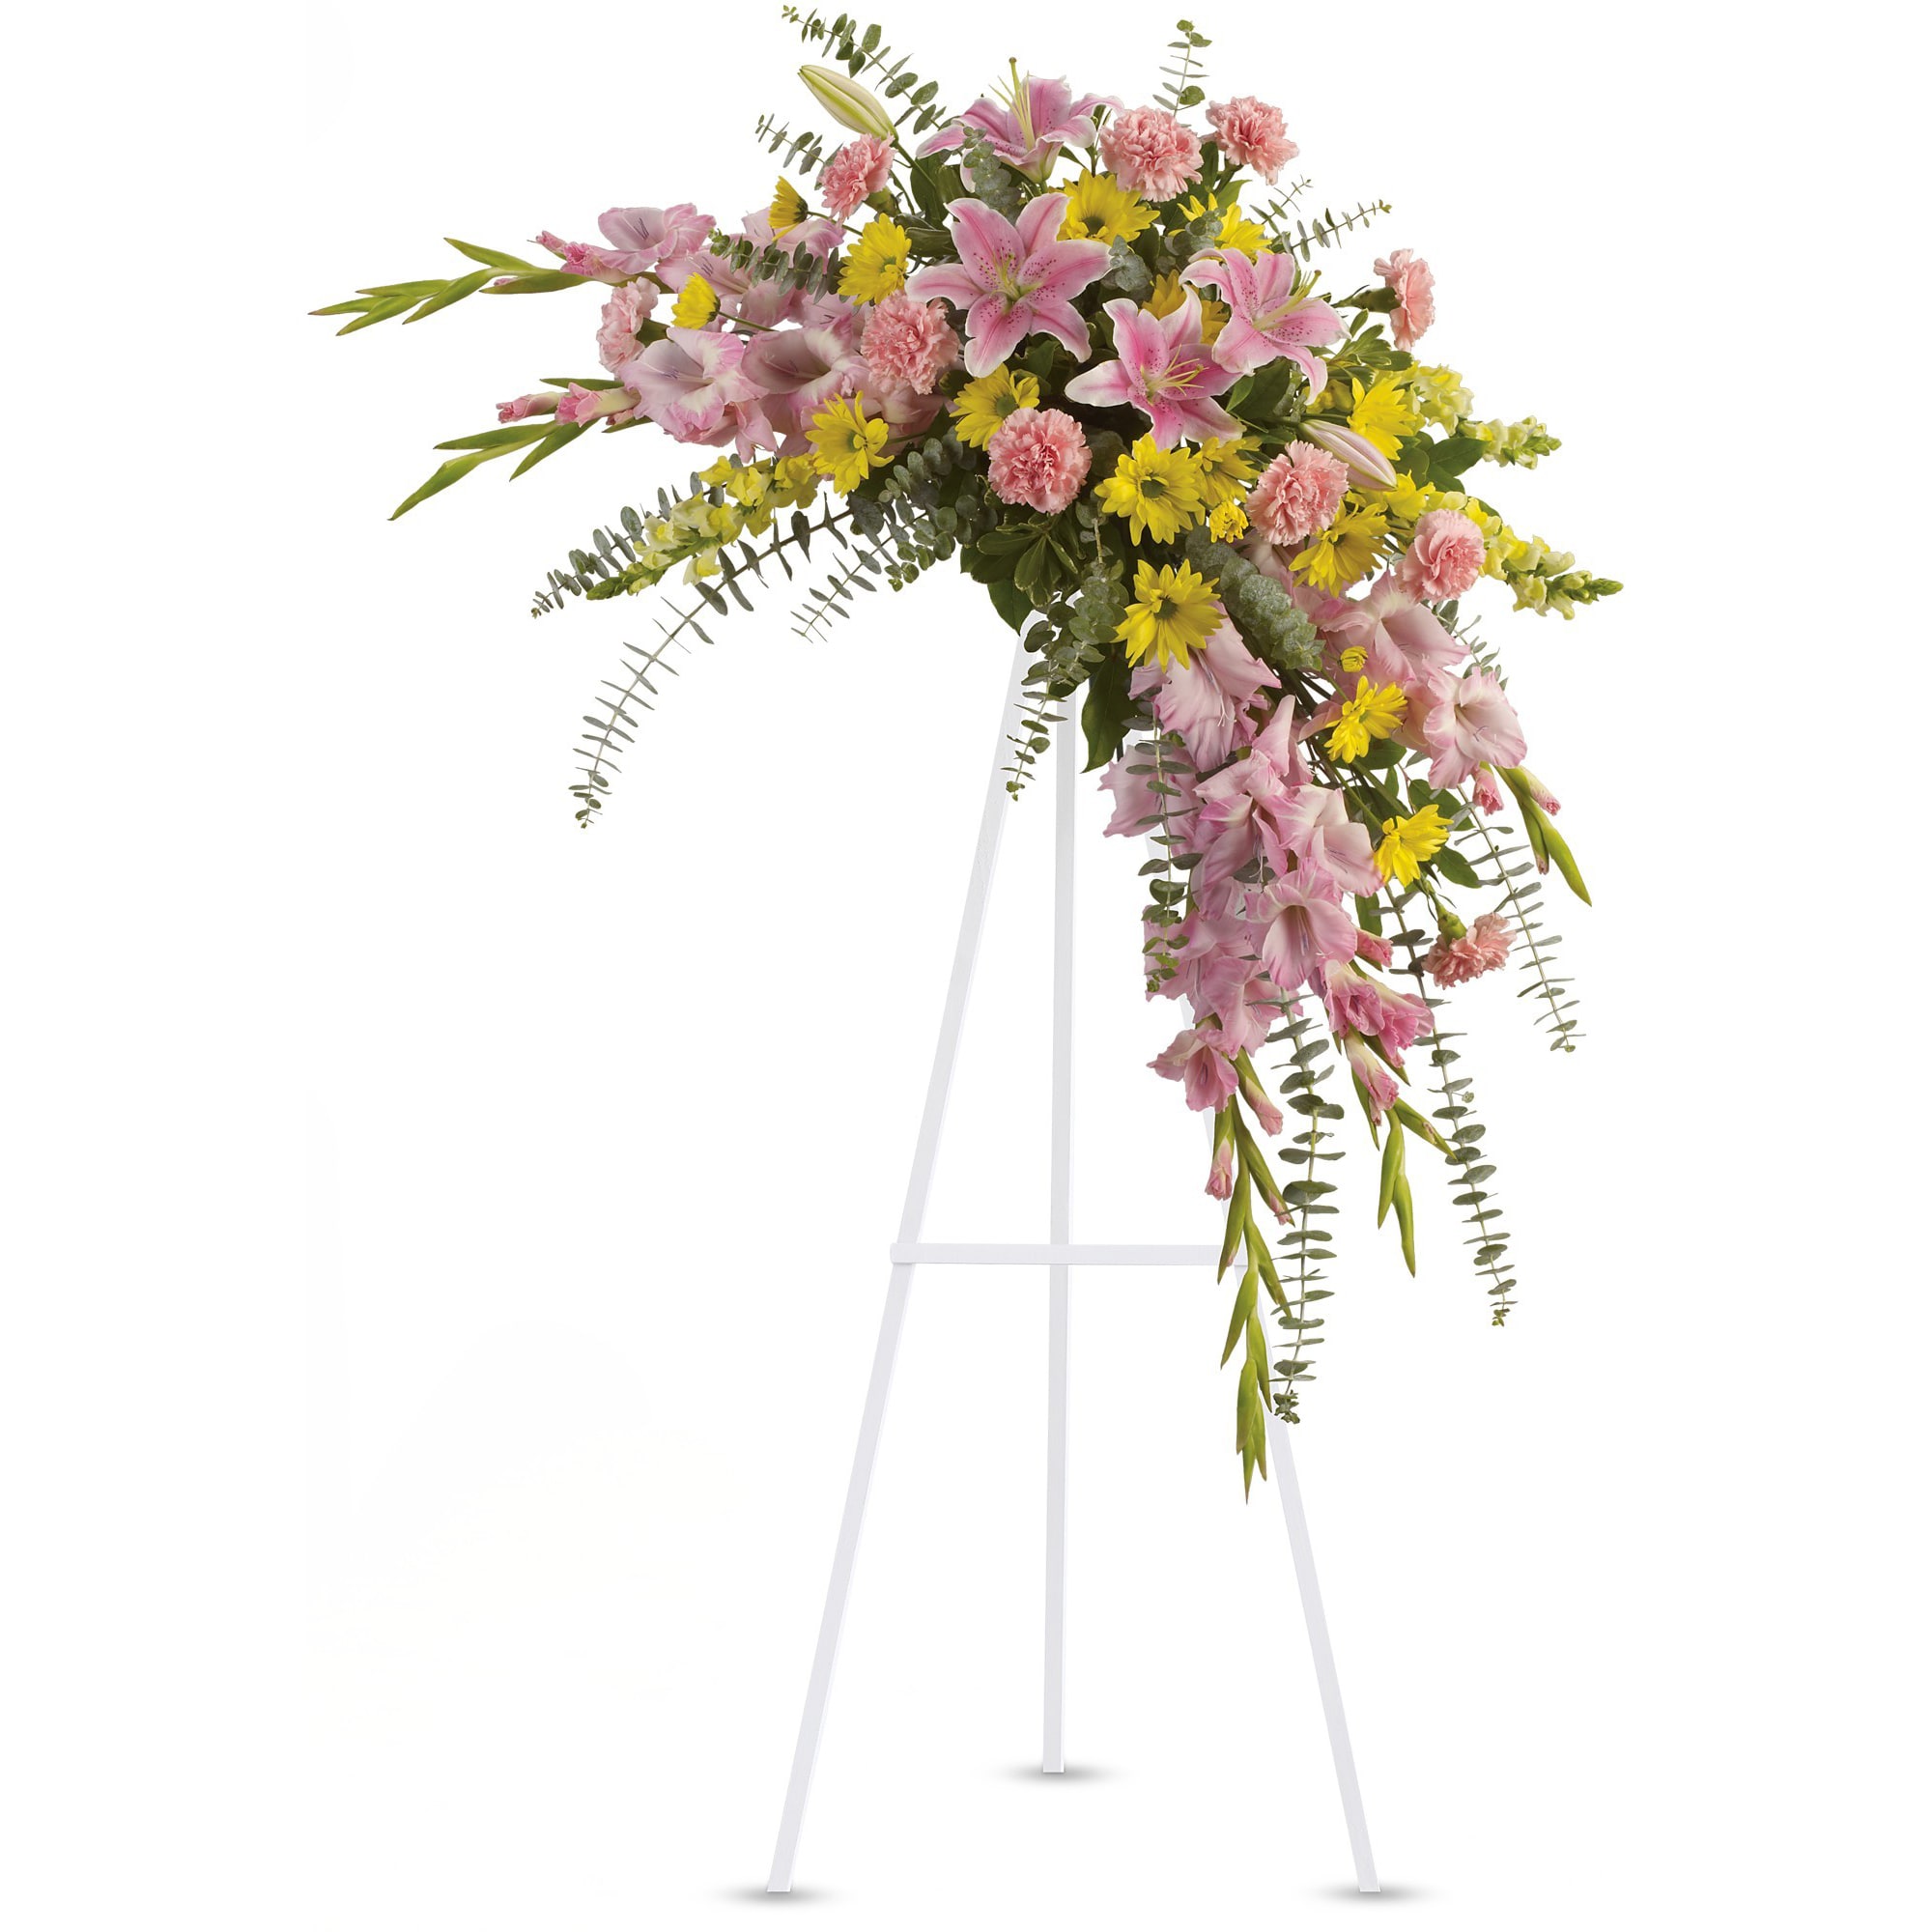 Sweet Solace Spray  - Rejoice with this softly dramatic cascade of pink and yellow blooms - lilies, gladioli and chrysanthemums - that has hints of eucalyptus and variegated greens.  Standard: As shown T249-1A Deluxe:    Addition of roses Premium: Larger and fuller 